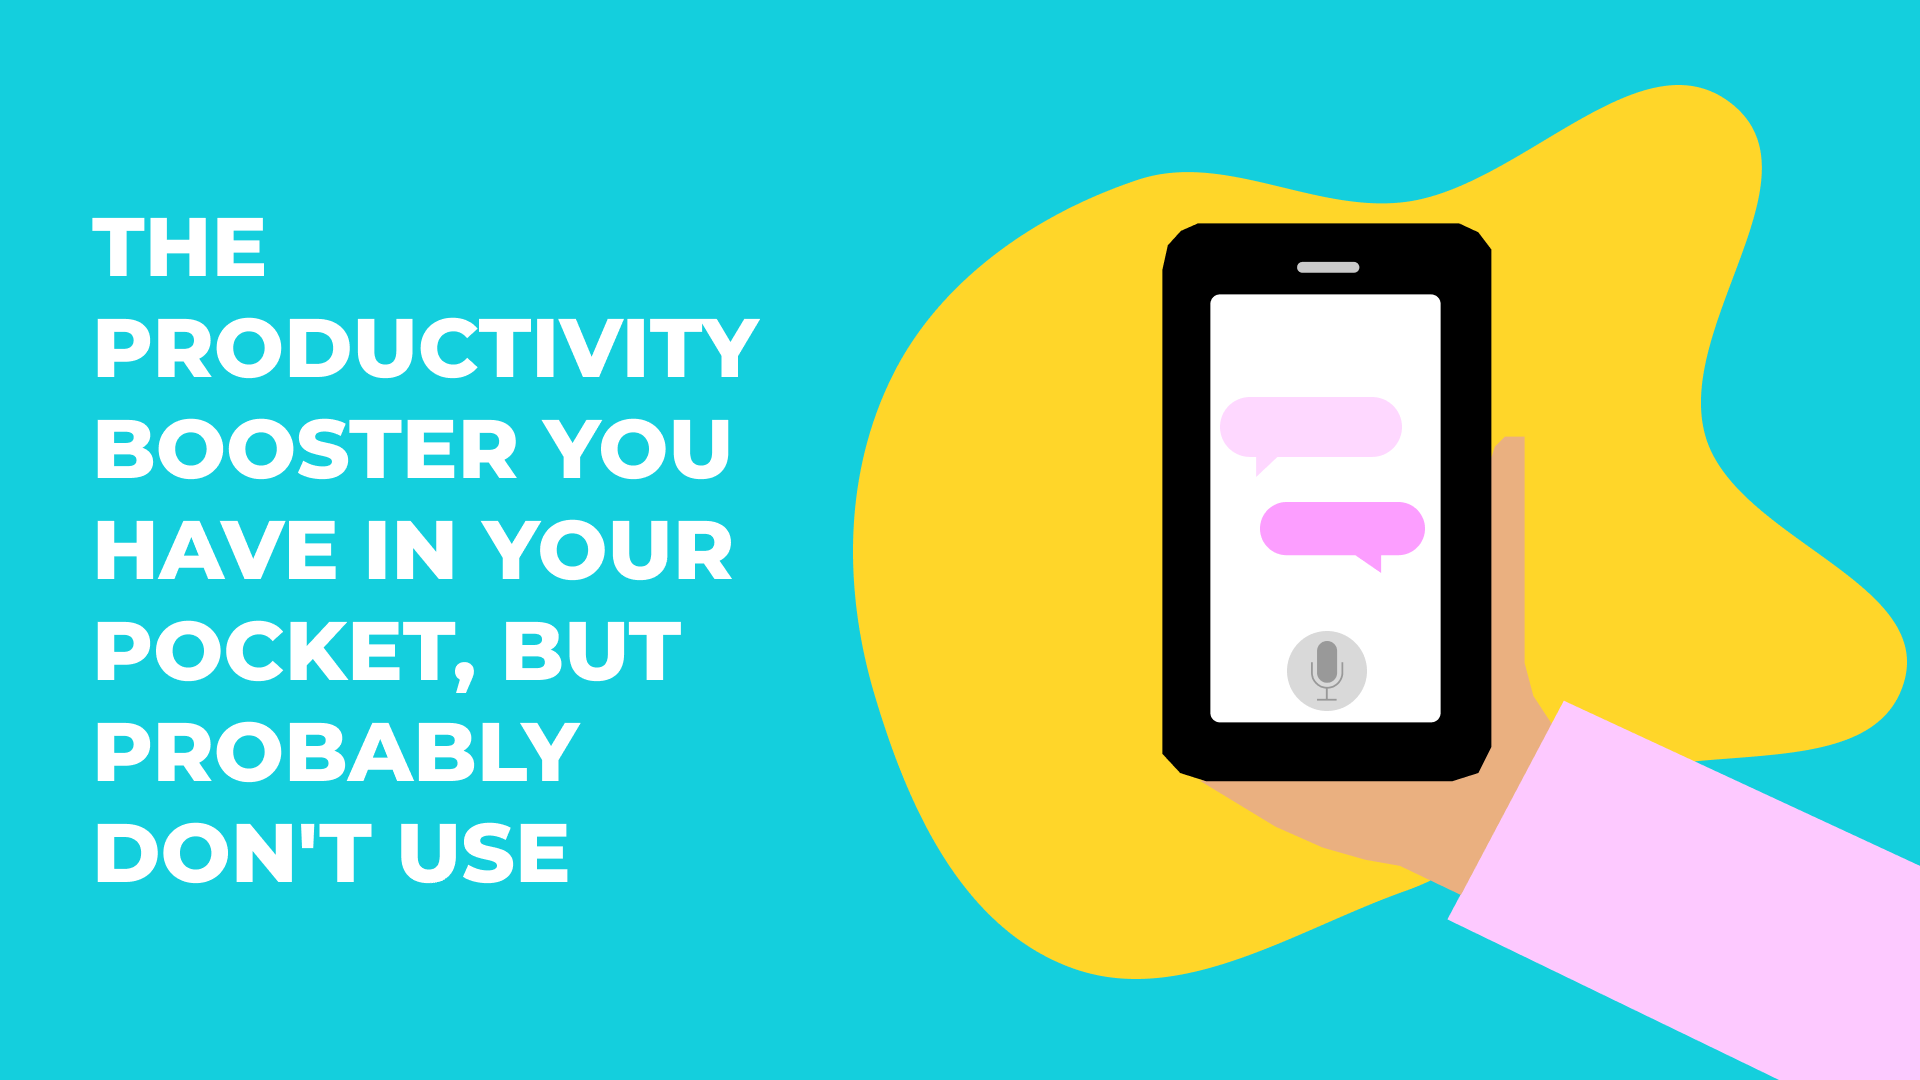 The Productivity Booster You Have In Your Pocket, But Probably Don't Use